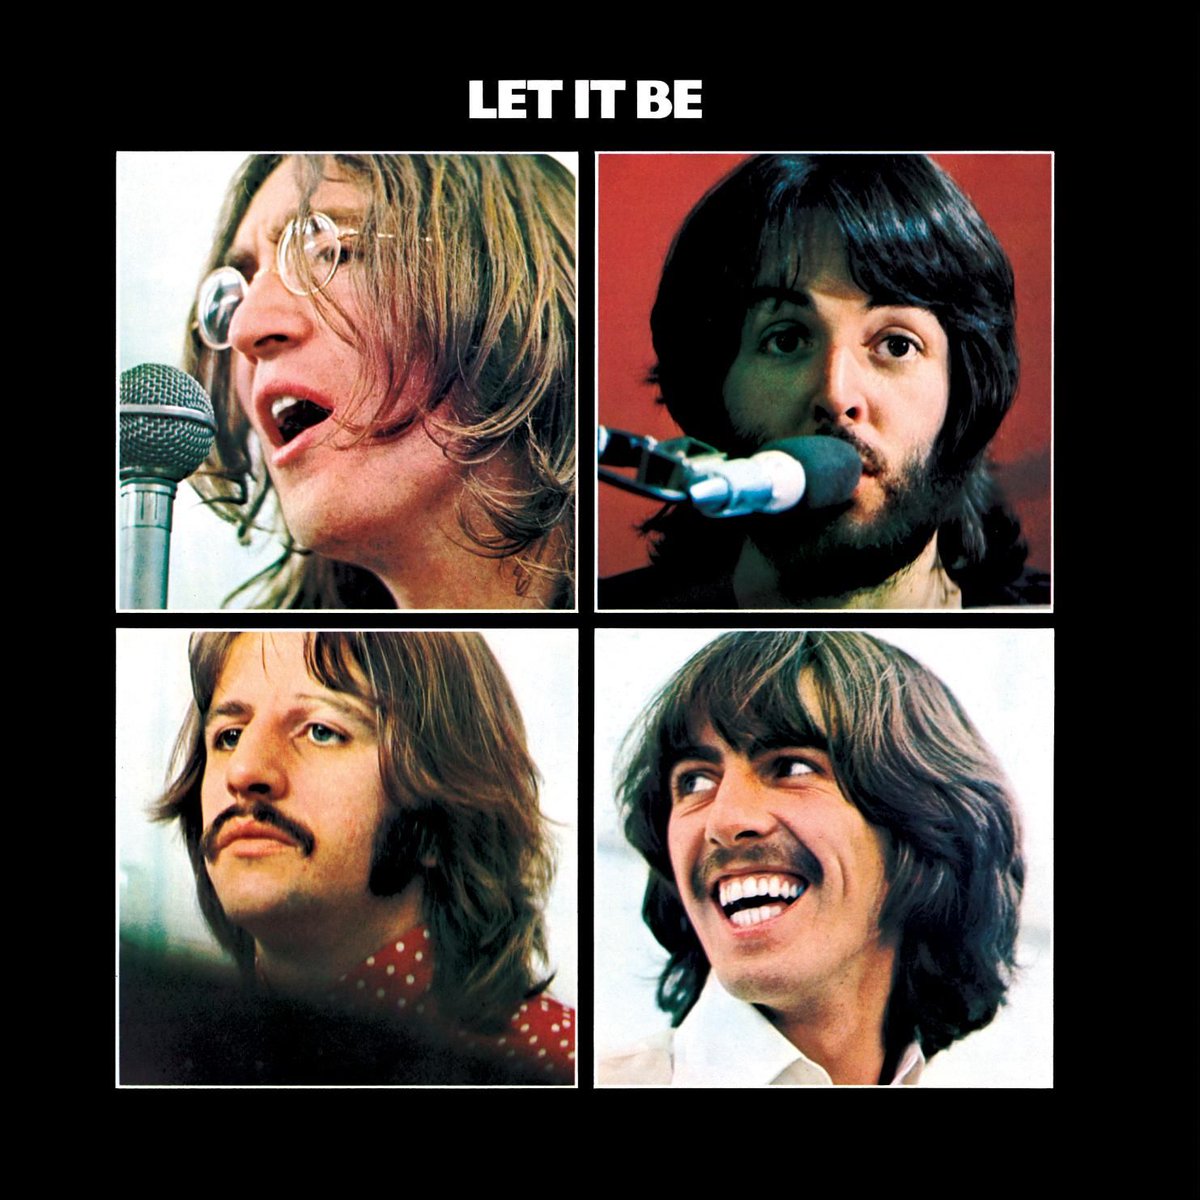 54 years ago today (May 8, 1970) The Beatles released their 12th & final studio album 'Let it Be'. Which is your favorite song? #thebeatles #LetItBe